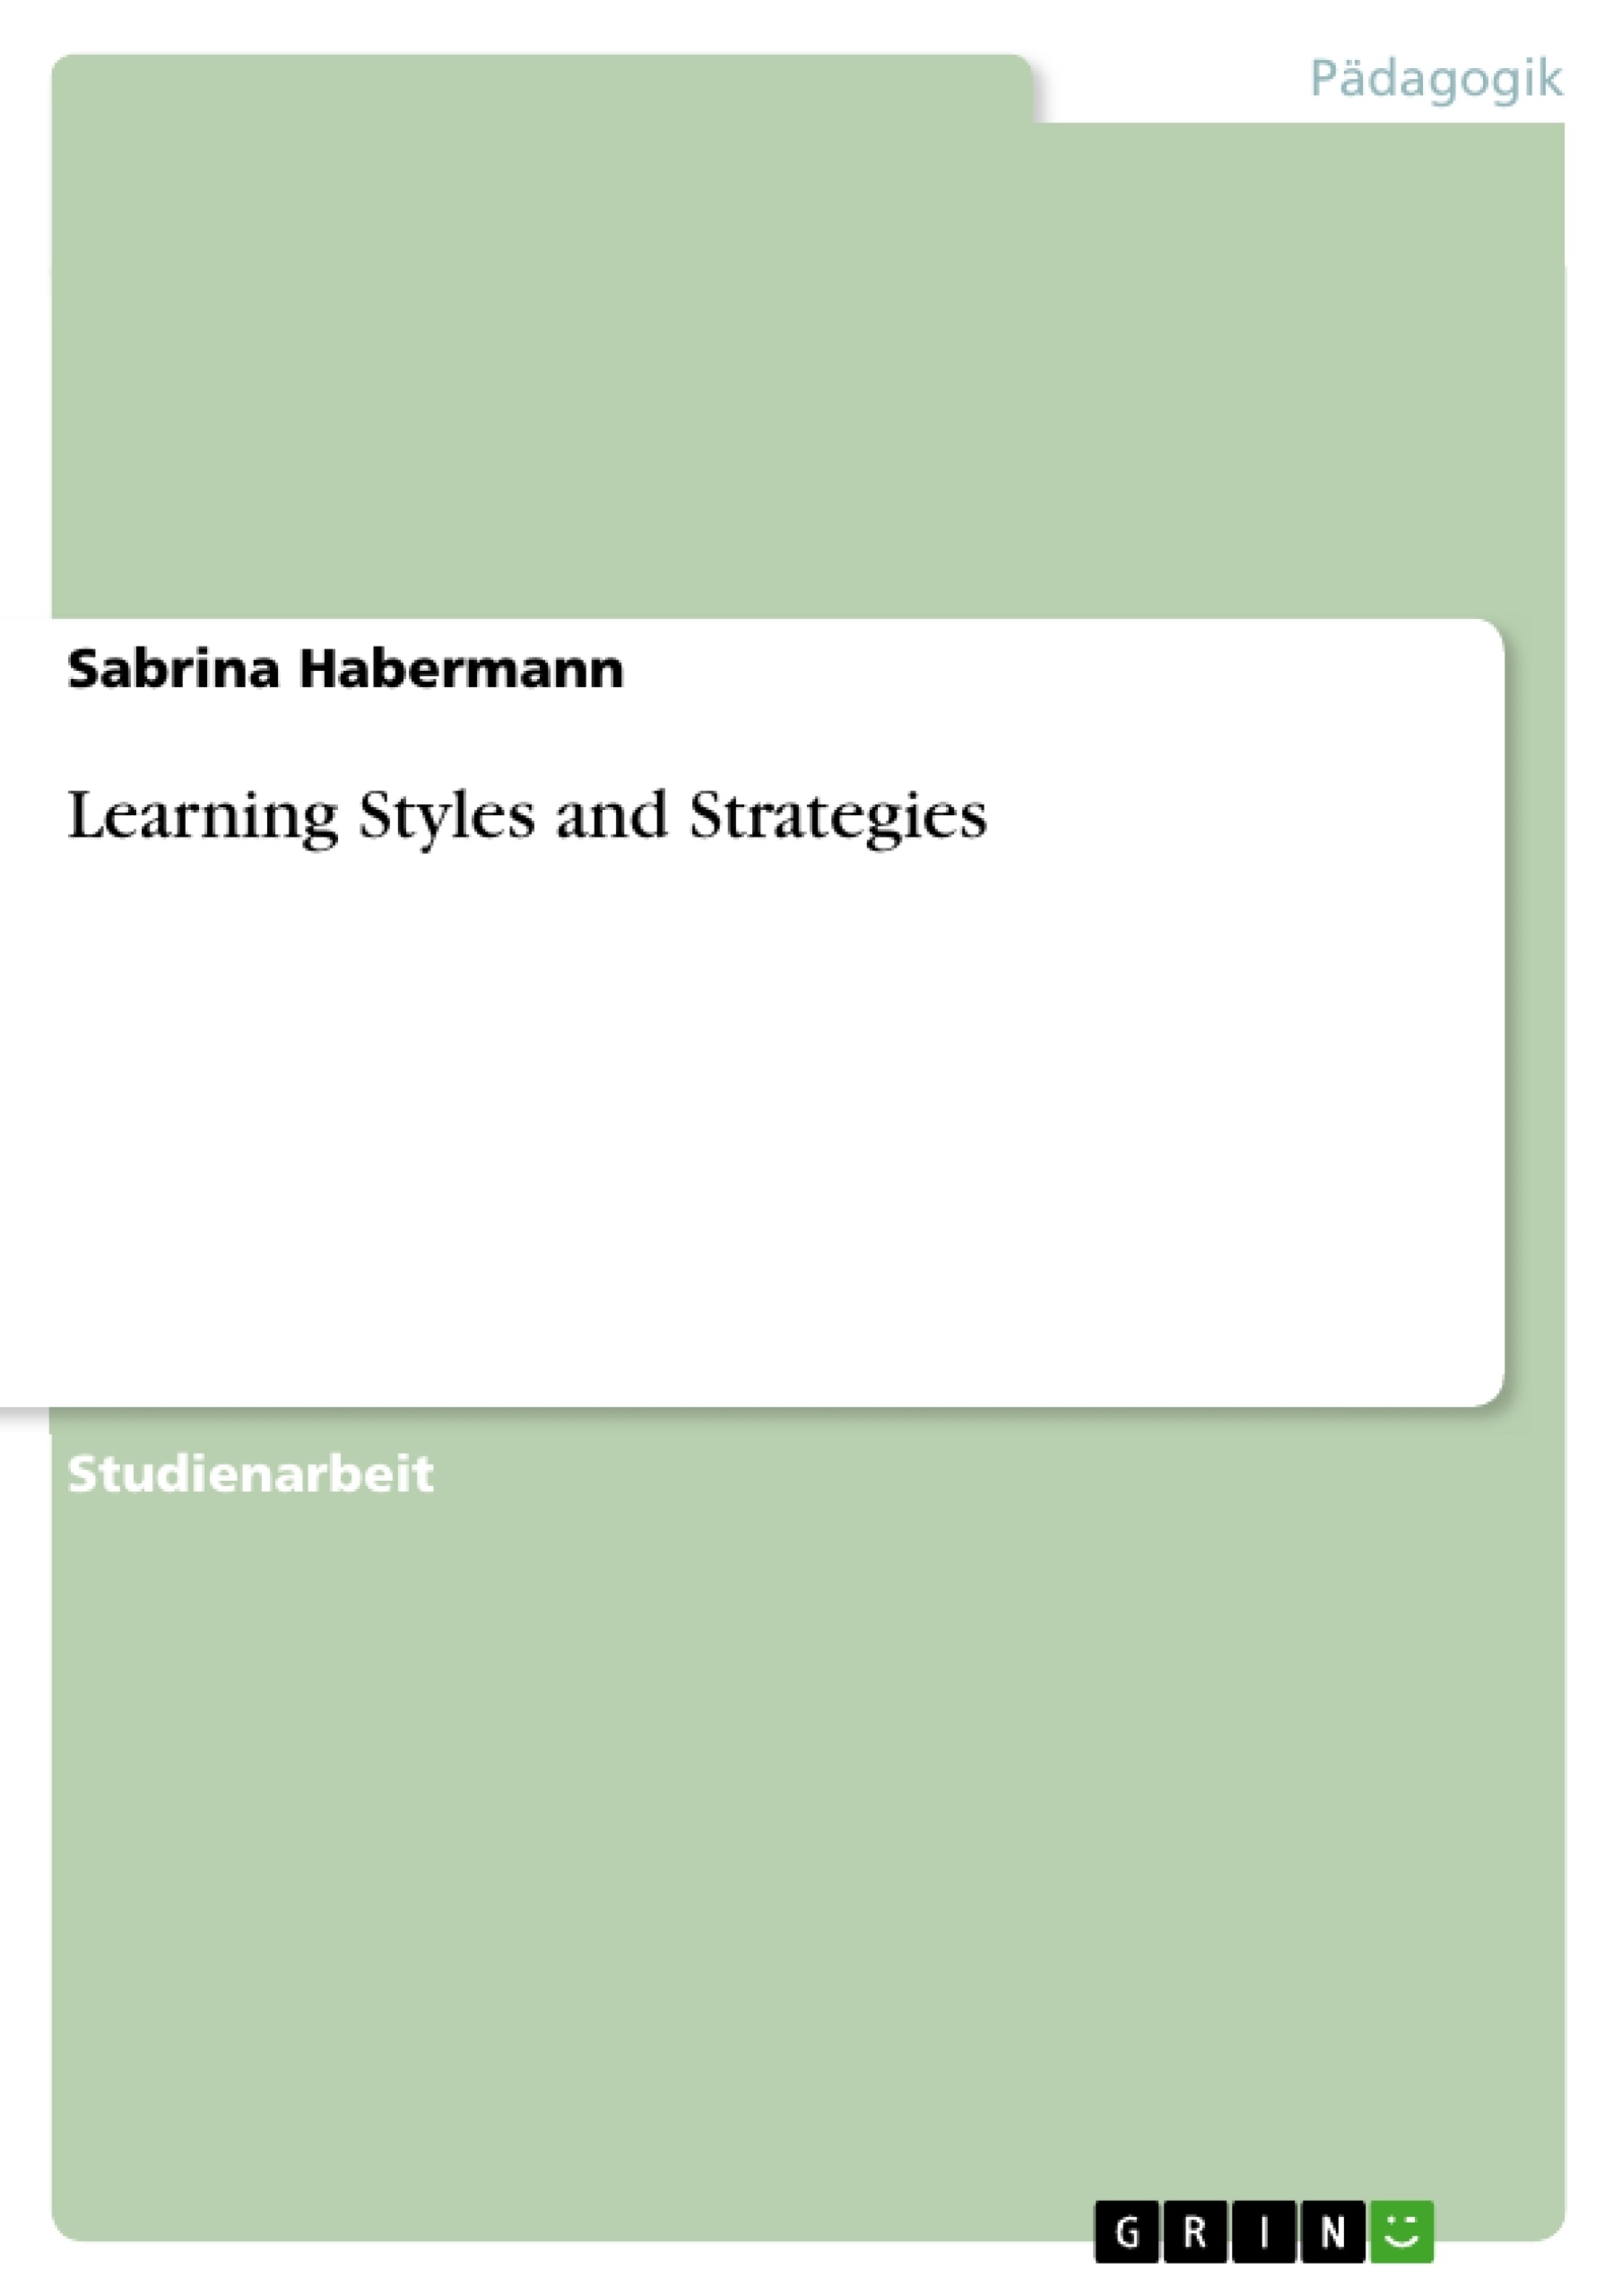 Titel: Learning Styles and Strategies